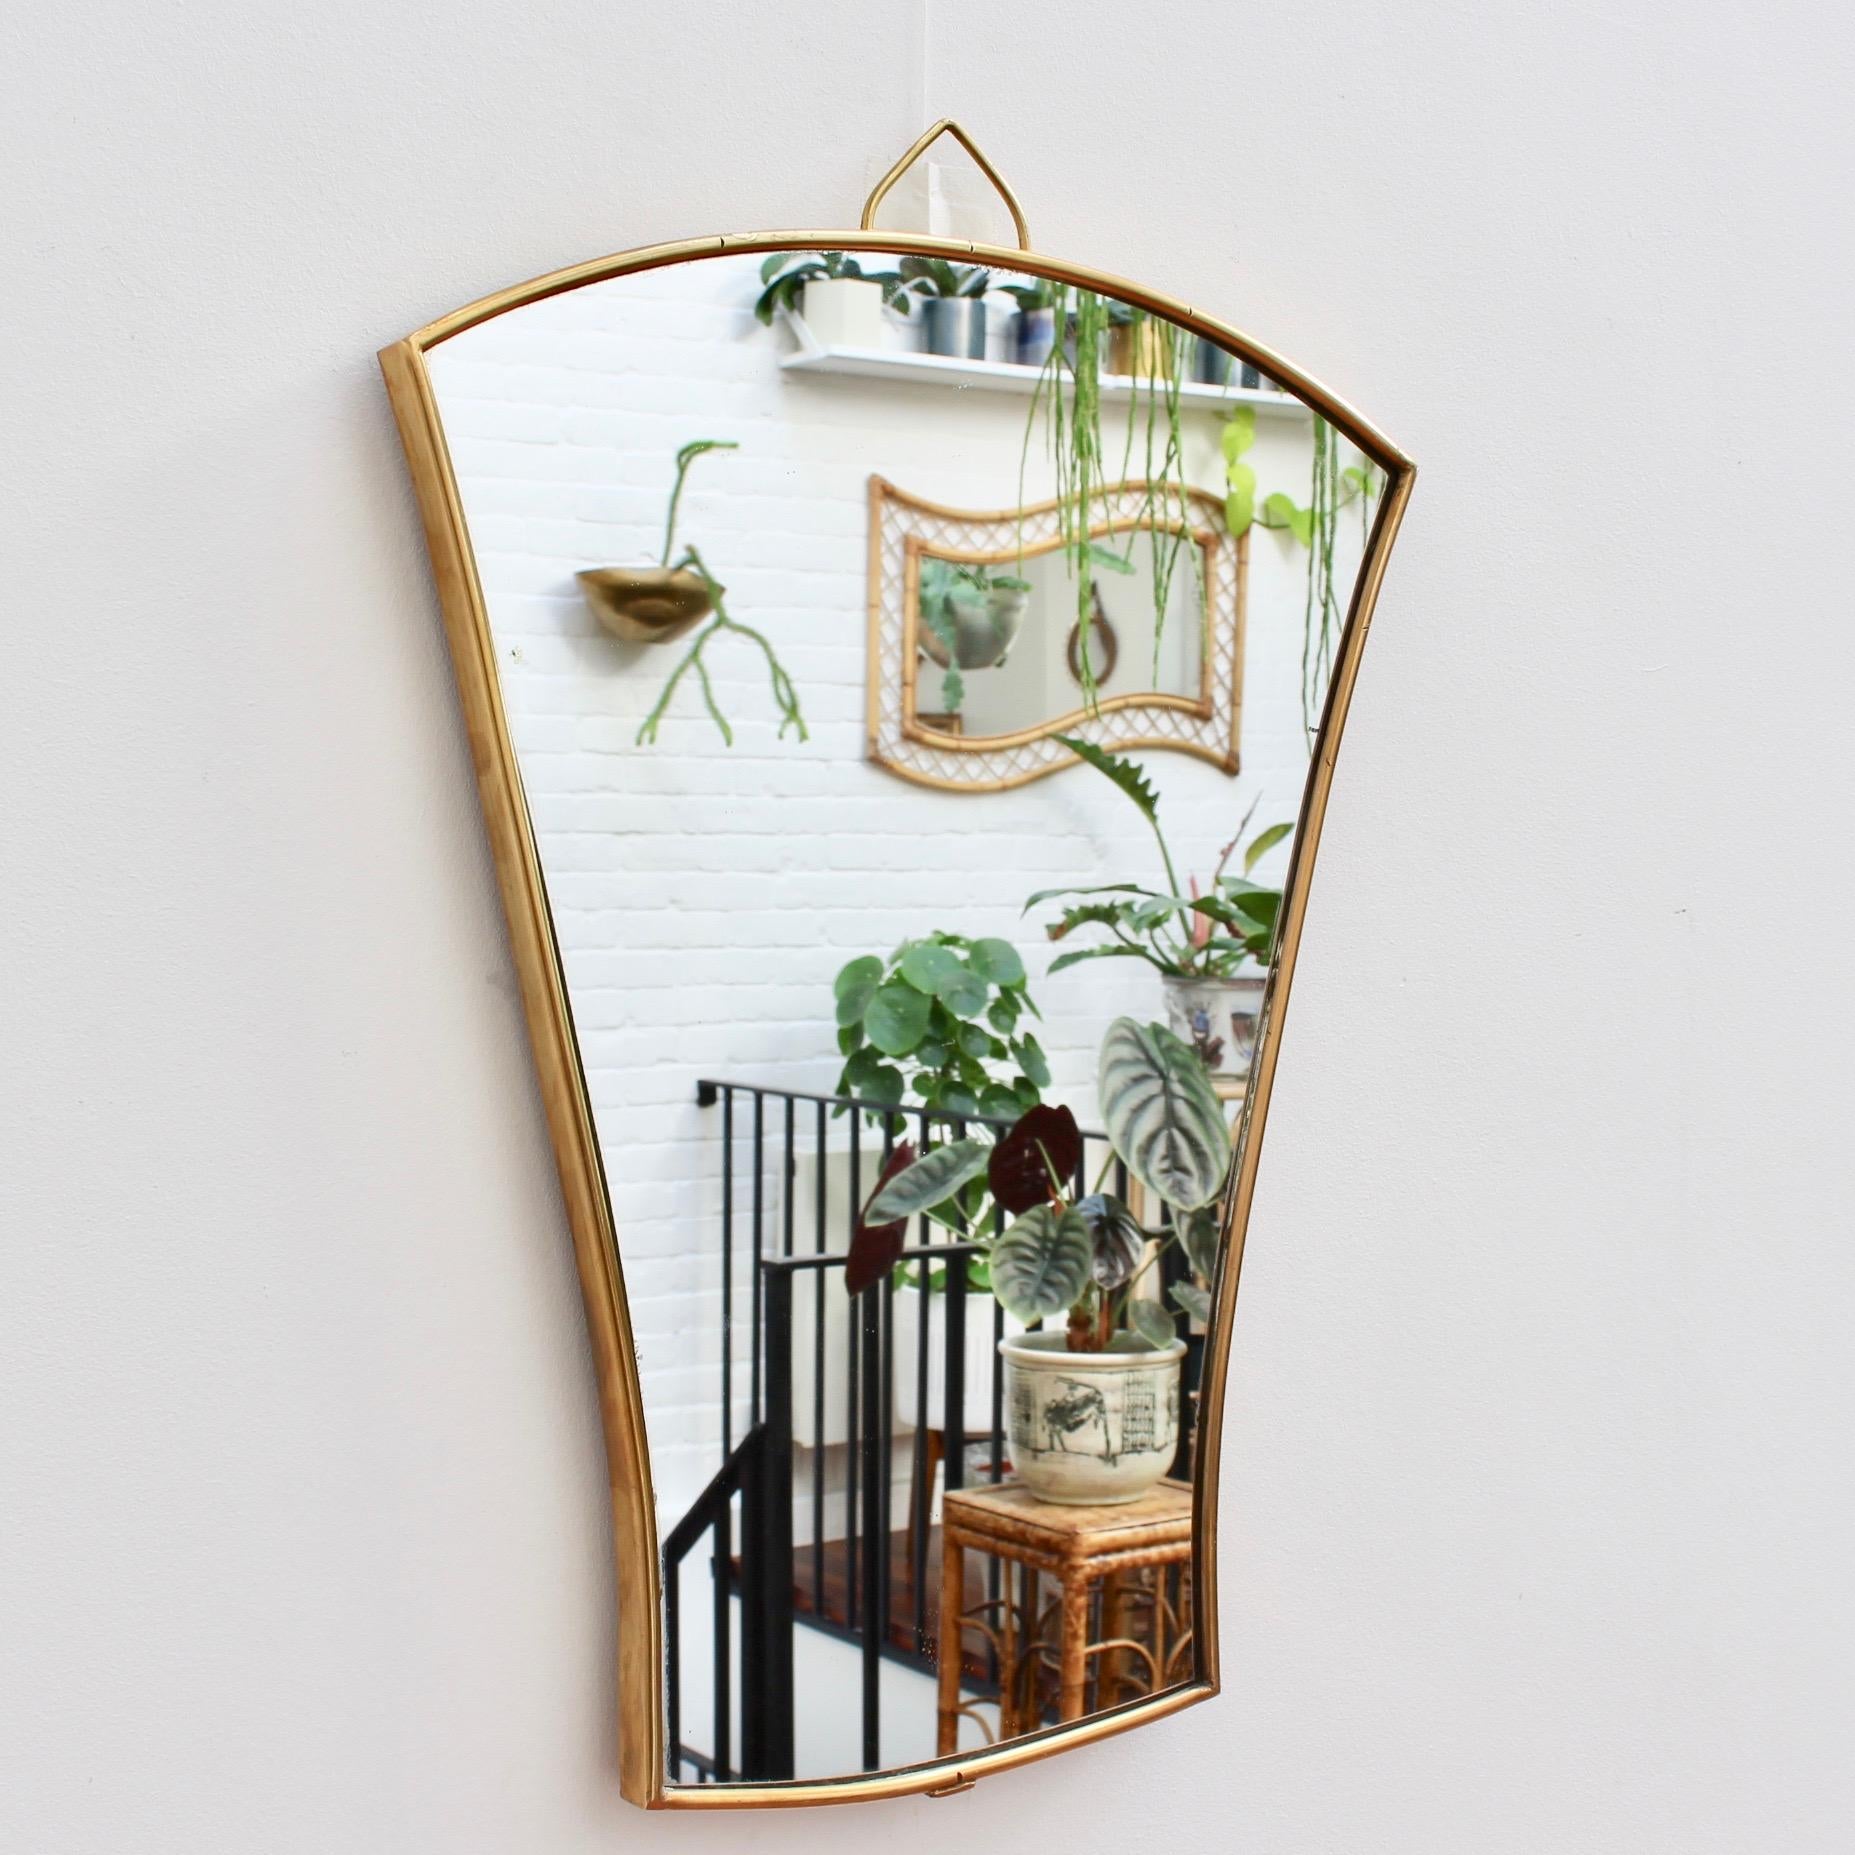 A midcentury Italian wall mirror with brass frame (circa 1950s). The small mirror is in the form of a folding fan. Classically elegant and distinctive in a modern Gio Ponti style. This mirror is in good vintage condition. There are some evident